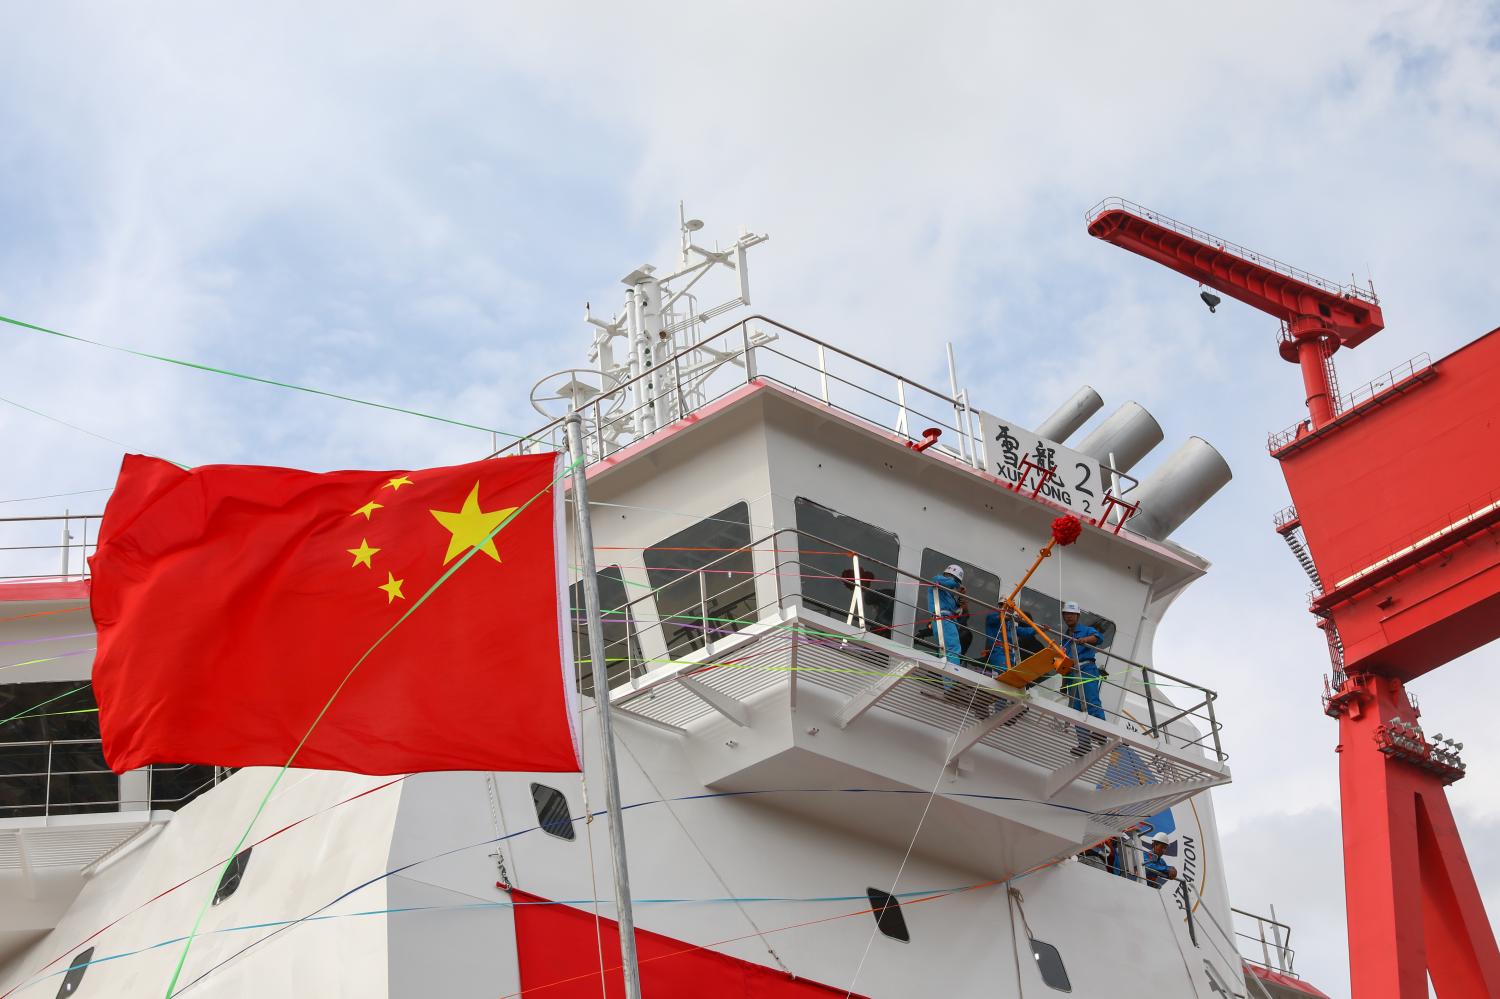 China's first domestically-built polar research vessel and icebreaker "Xuelong 2" prepares to take water at Jiangnan Shipyard in Chongming's Changxing Island in Shanghai, China, 10 September 2018.China's first wholly domestically conceived and built icebreaker Xuelong 2 took to the sea on Monday (10 September 2018) at Jiangnan Shipyard in Chongming's Changxing Island. Construction of the vessel began in December 20, 2016. Xuelong 2 will be put into service in the first half of 2019. It will team up with another icebreaker Xuelong on polar expeditions next year. The vessel is 122.5 meters in length and 22.3 meters wide, with a draught of 7.85 meters and displacement of 13,990 tons. It can reach 15 knots and it has a range of 20,000 nautical miles. Xuelong 2 can break 1.5-meter ice with a thick covering of snow at speeds of 2 to 3 knots. Its combines the requirements of a new-generation research vessel with environmental protection having an azimuthing electric propulsion system. Researchers can make observations of environmental elements like the ocean water, sea ice and polar air from the vessel and take samples from the marine environment in connection with climate change.No Use China. No Use France.